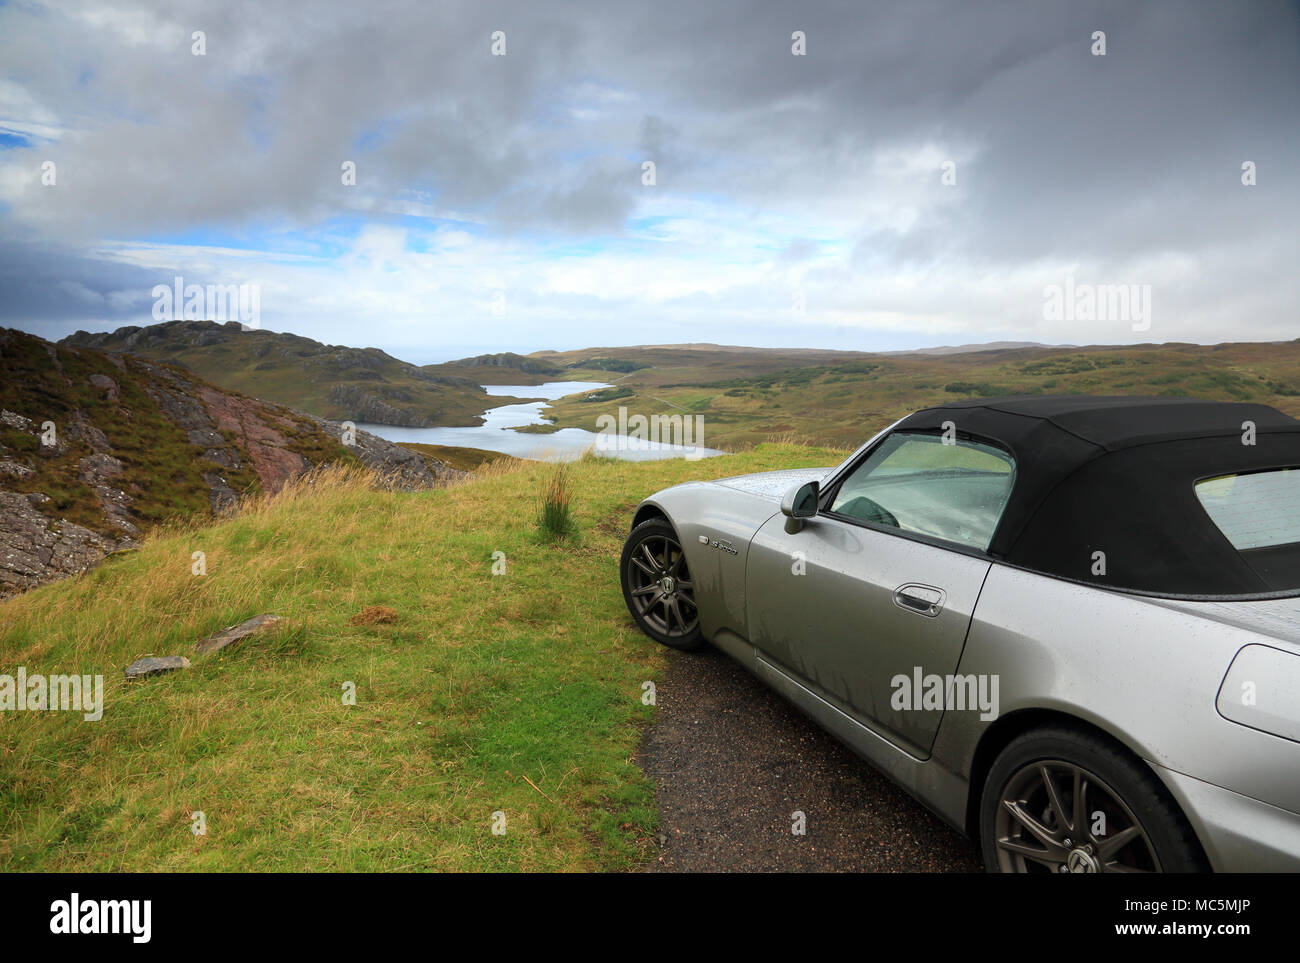 A silver sports car parked at a viewpoint in the highlands of Scotland, uk. Stock Photo